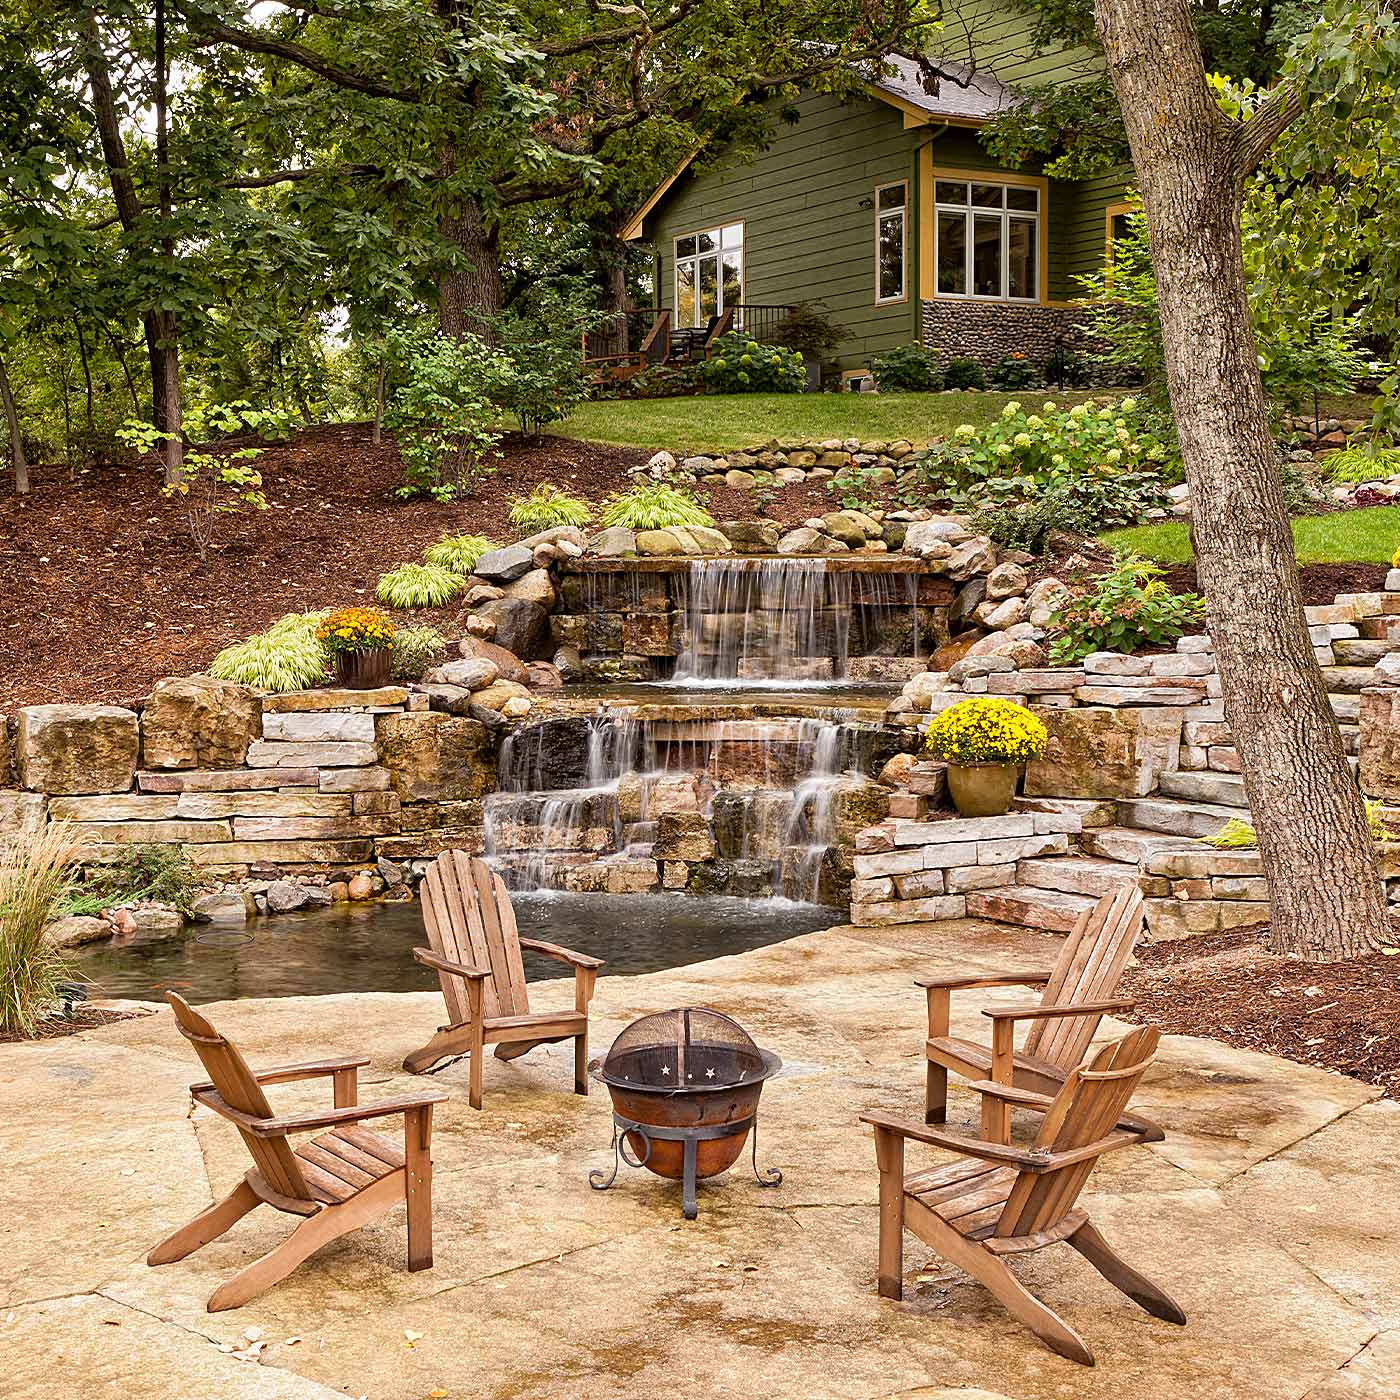 wooded chairs and a fire pit sit in front on a landscaped water fall in front of a green house up on the hill in Kensington, MD